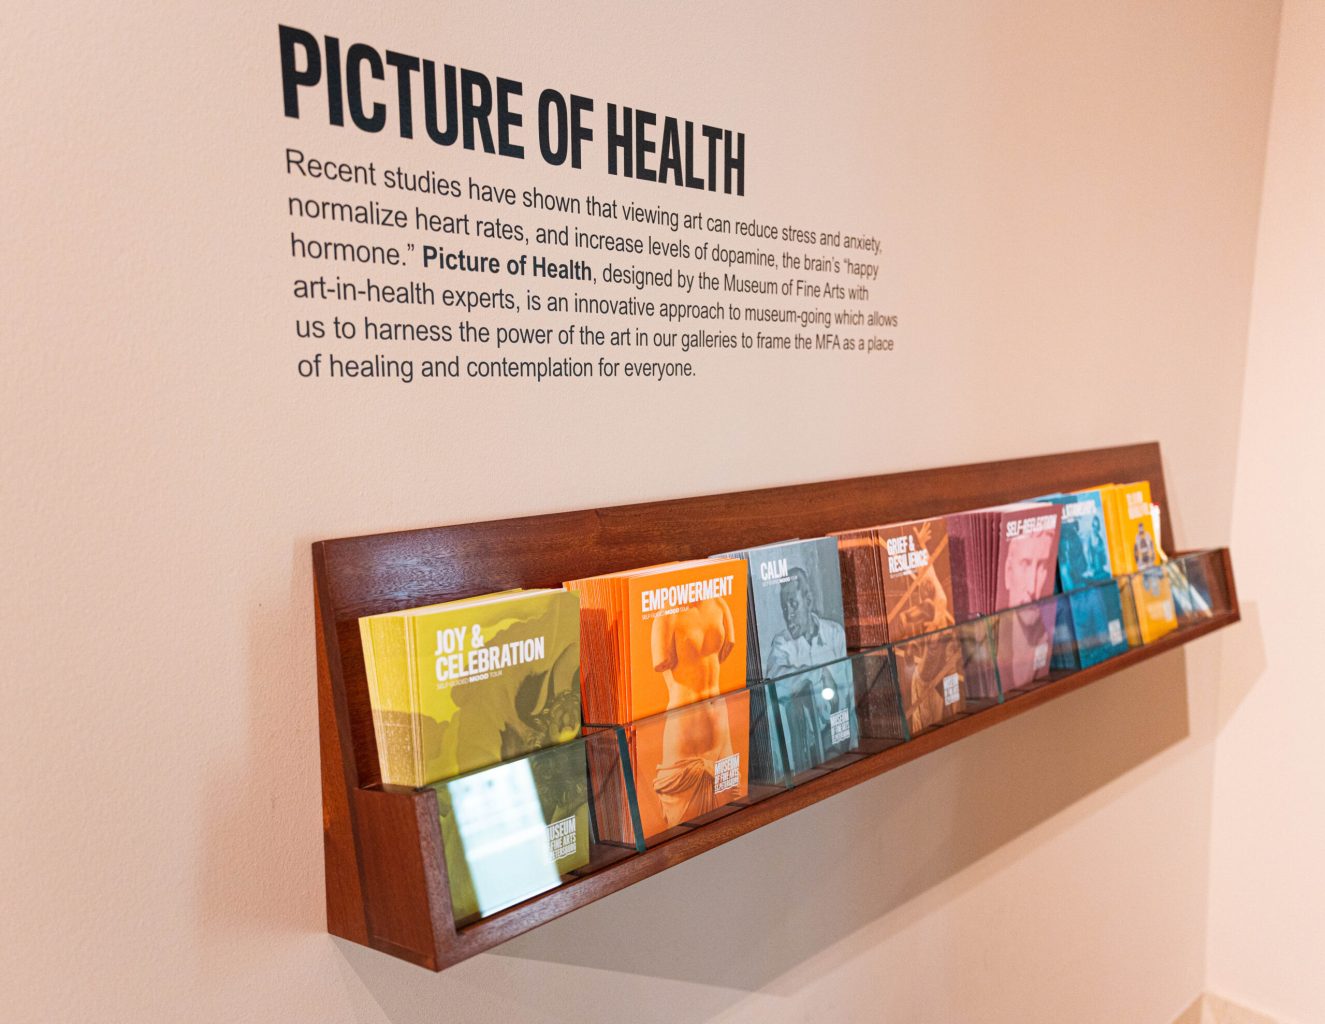 A row of pamphlets in different colors and mood-themed titles with the title "Picture of Health" and explanatory text about the initiatitive